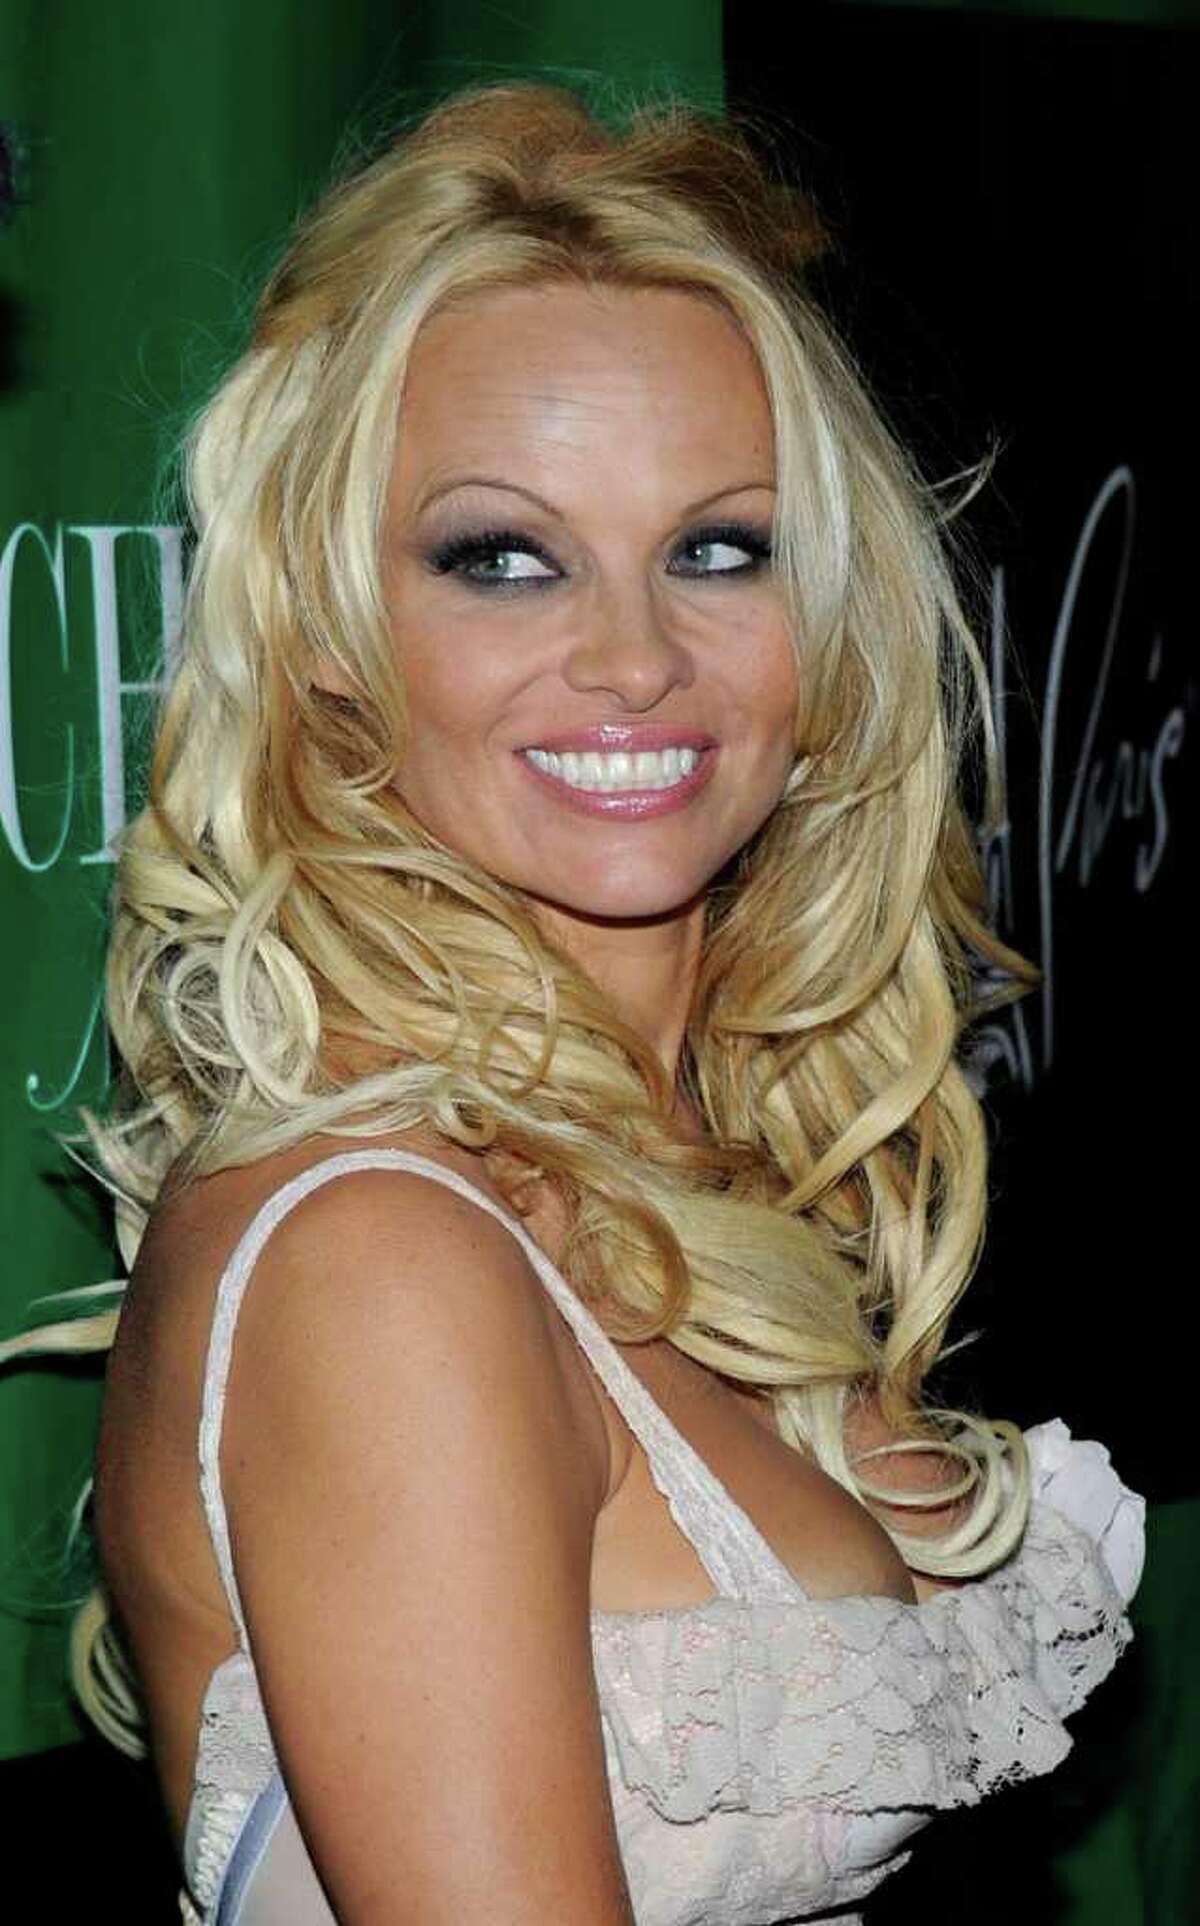 Actress Pamela Anderson arrives at the Chateau Nightclub & Gardens at the Paris Las Vegas to celebrate her birthday in Las Vegas, Nevada. Anderson turned 44.